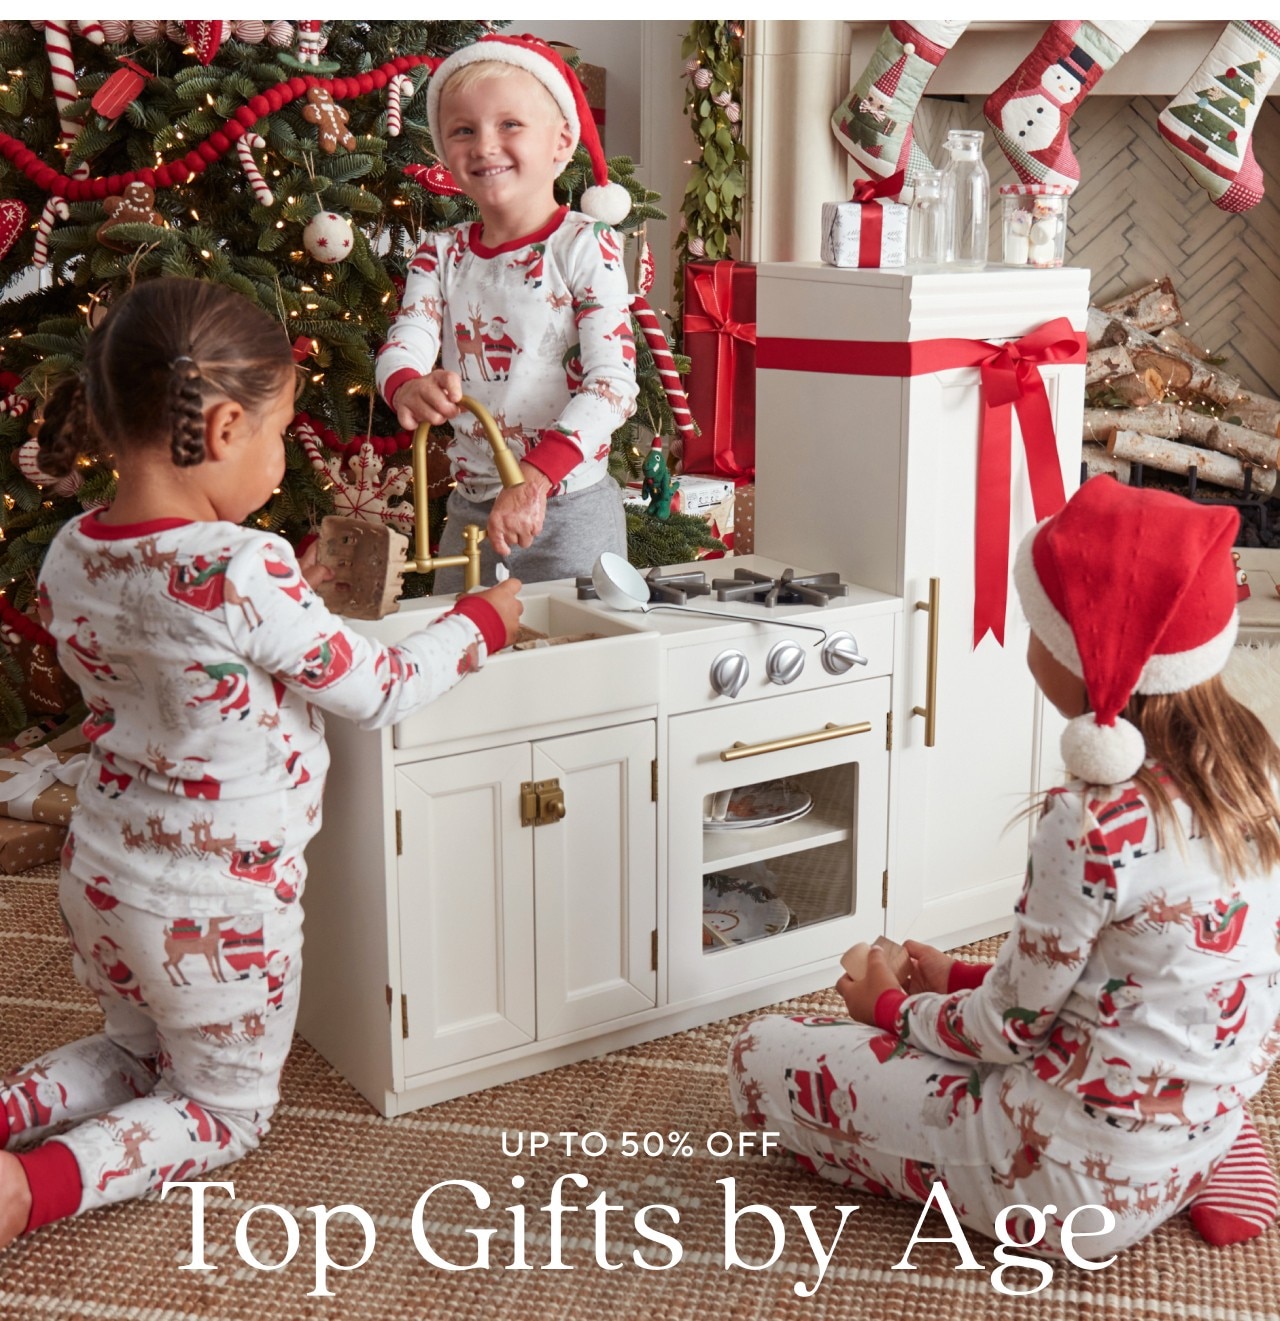 UP TO 50% OFF - TOP GIFTS BY AGE